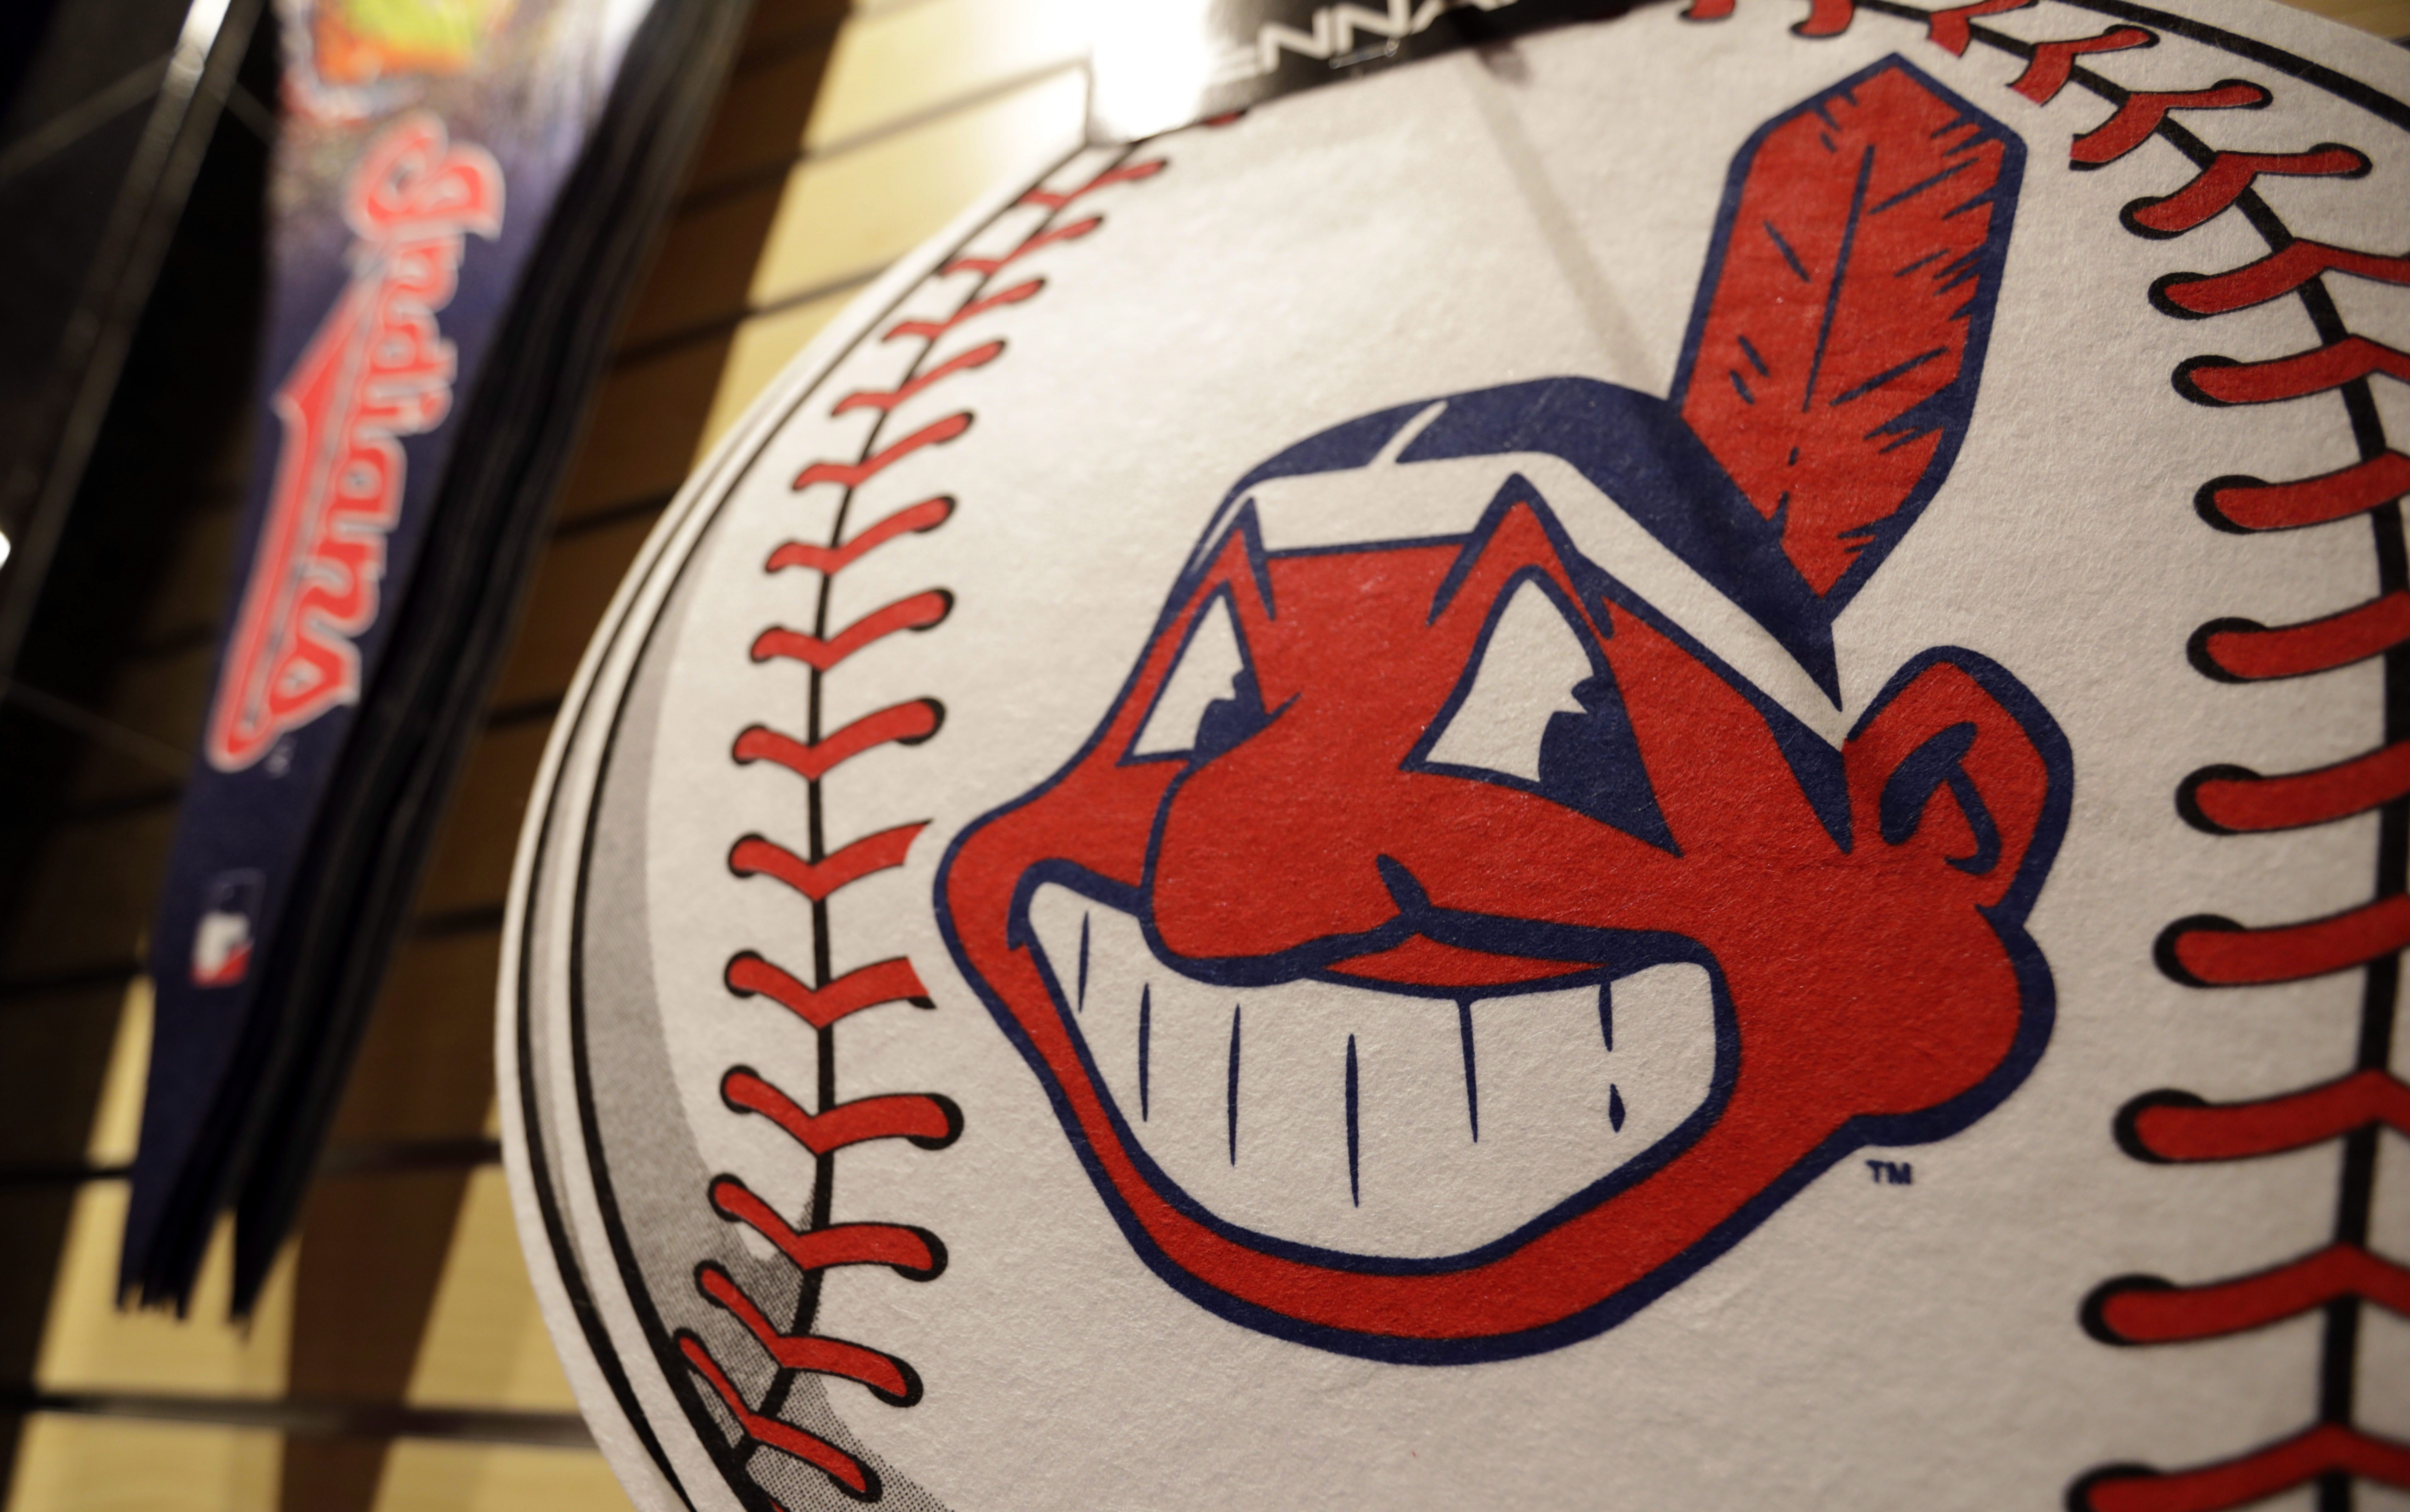 Native American groups applaud Cleveland Indians name change to